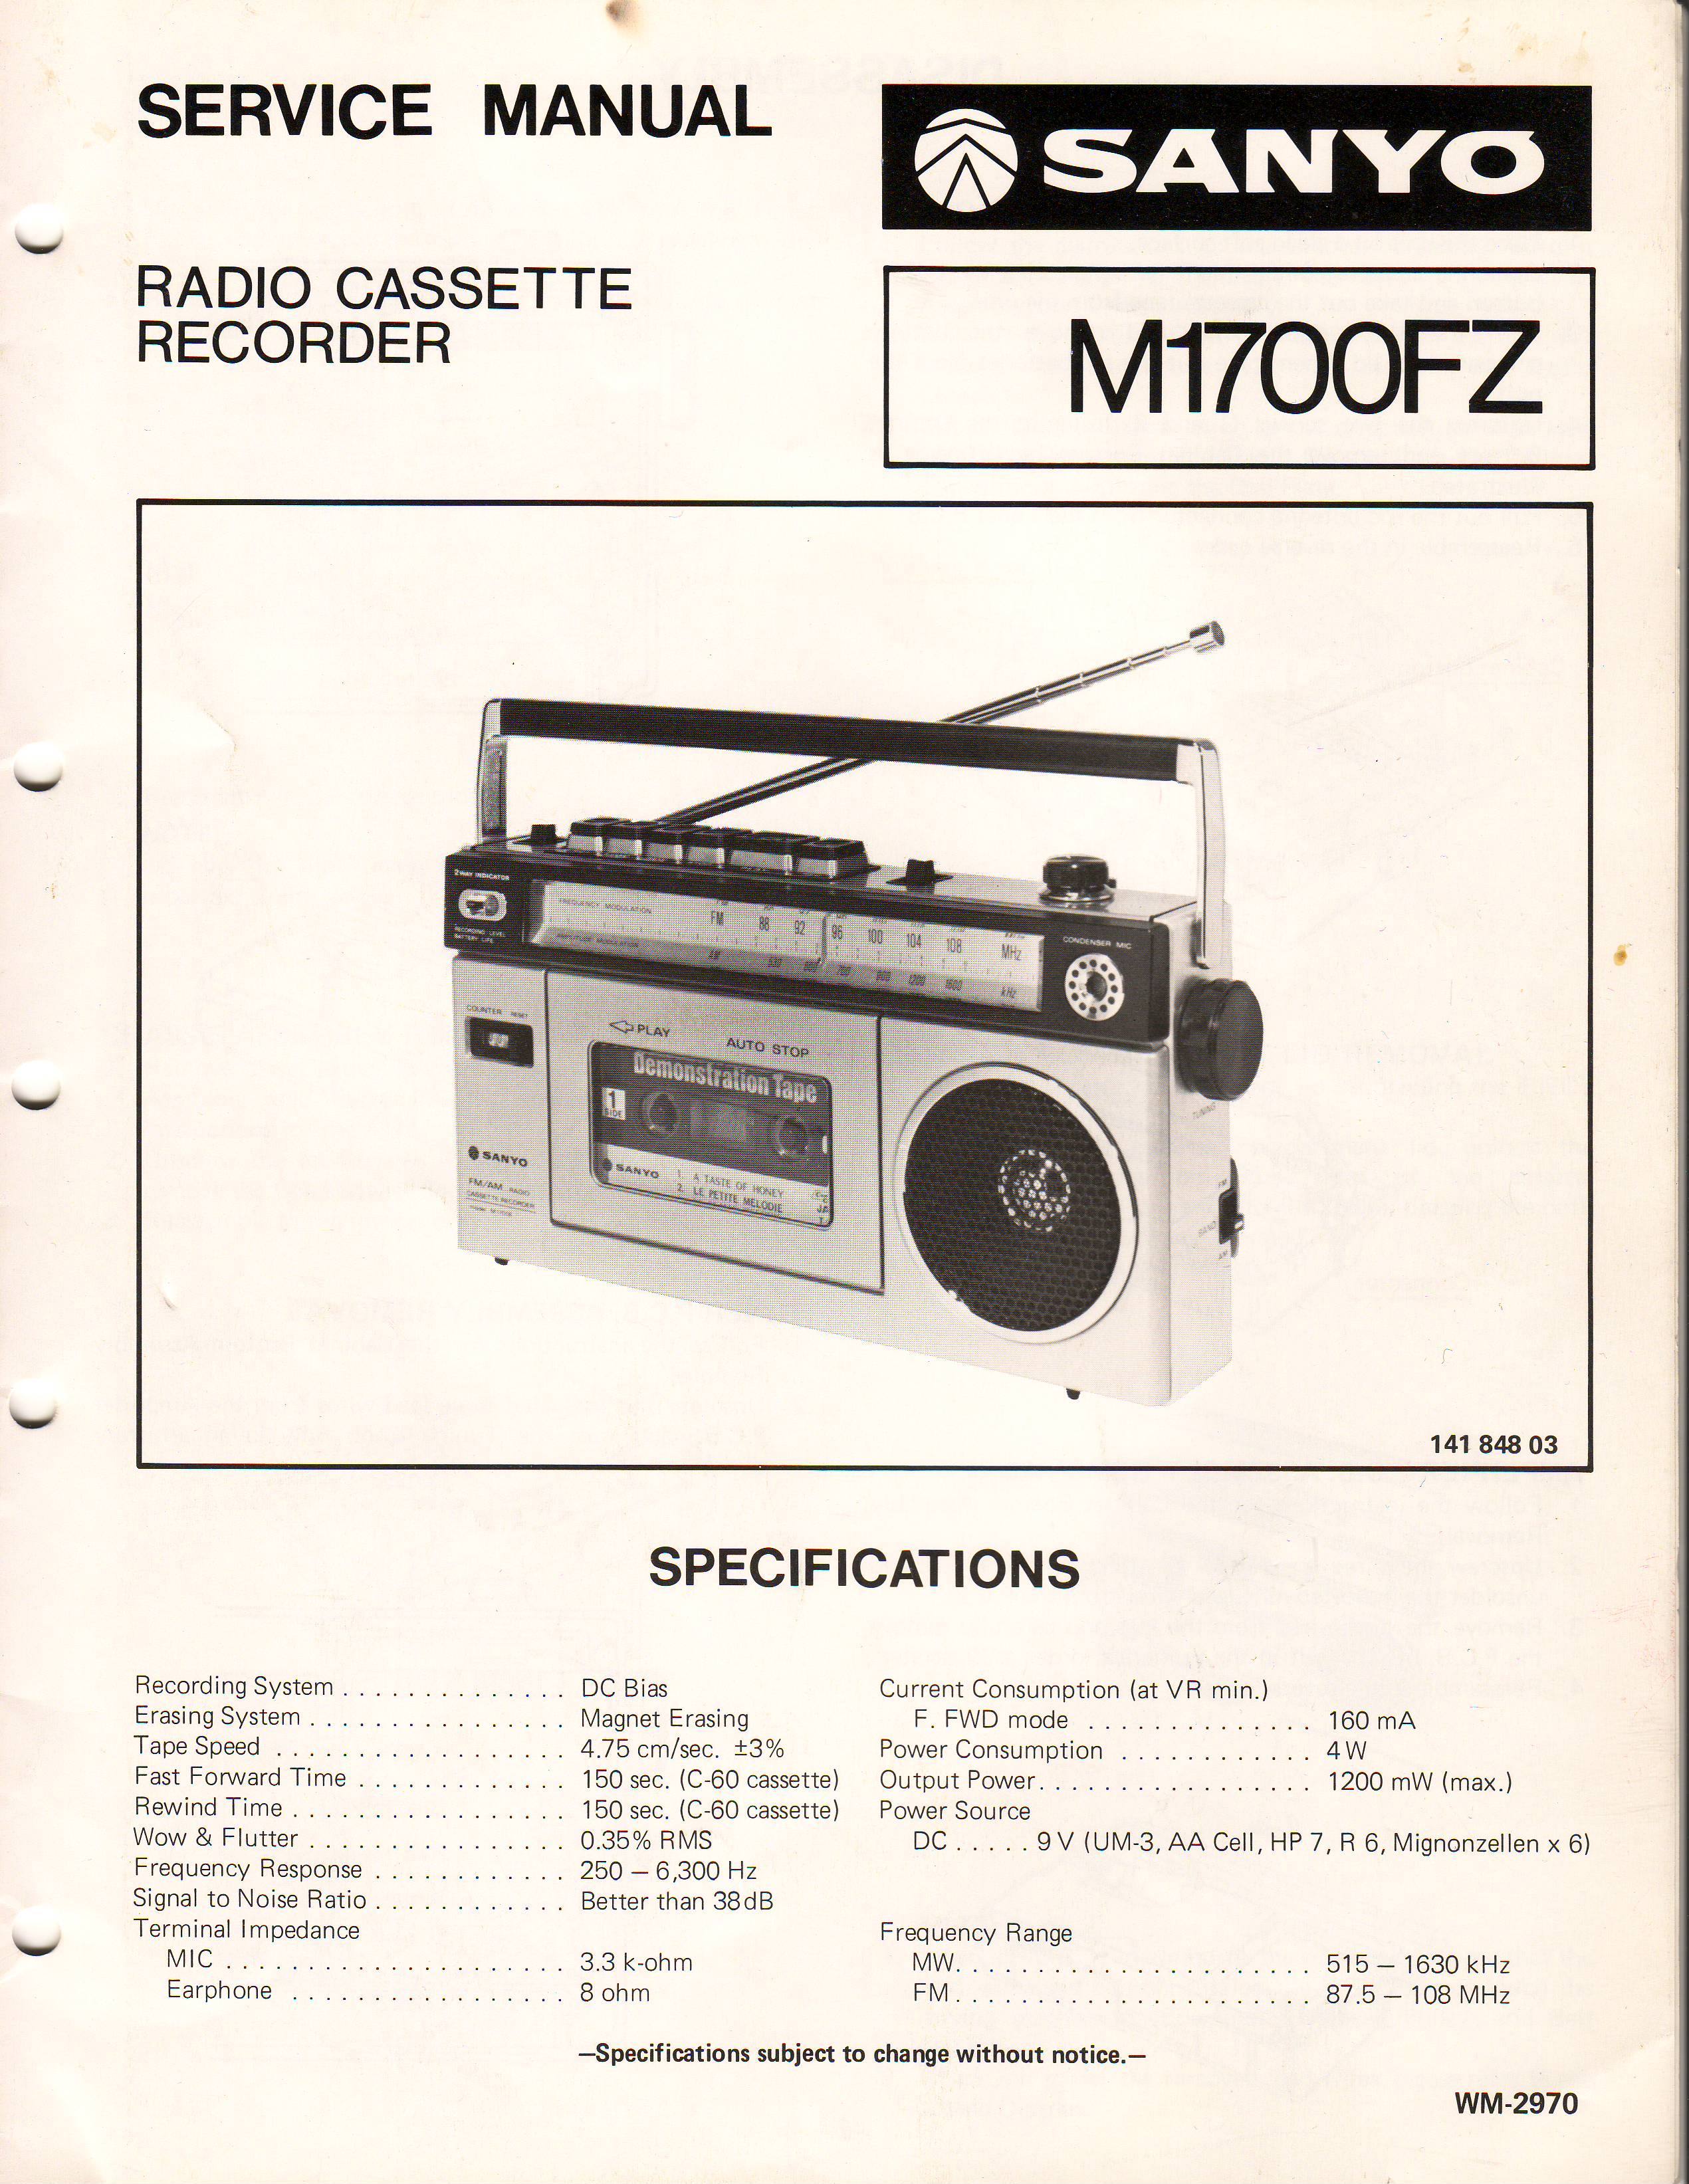 Sanyo M1700FZ Sanyo M1700FZ service manual. Complete PDF is large (39 MB) and will be uploaded on request.